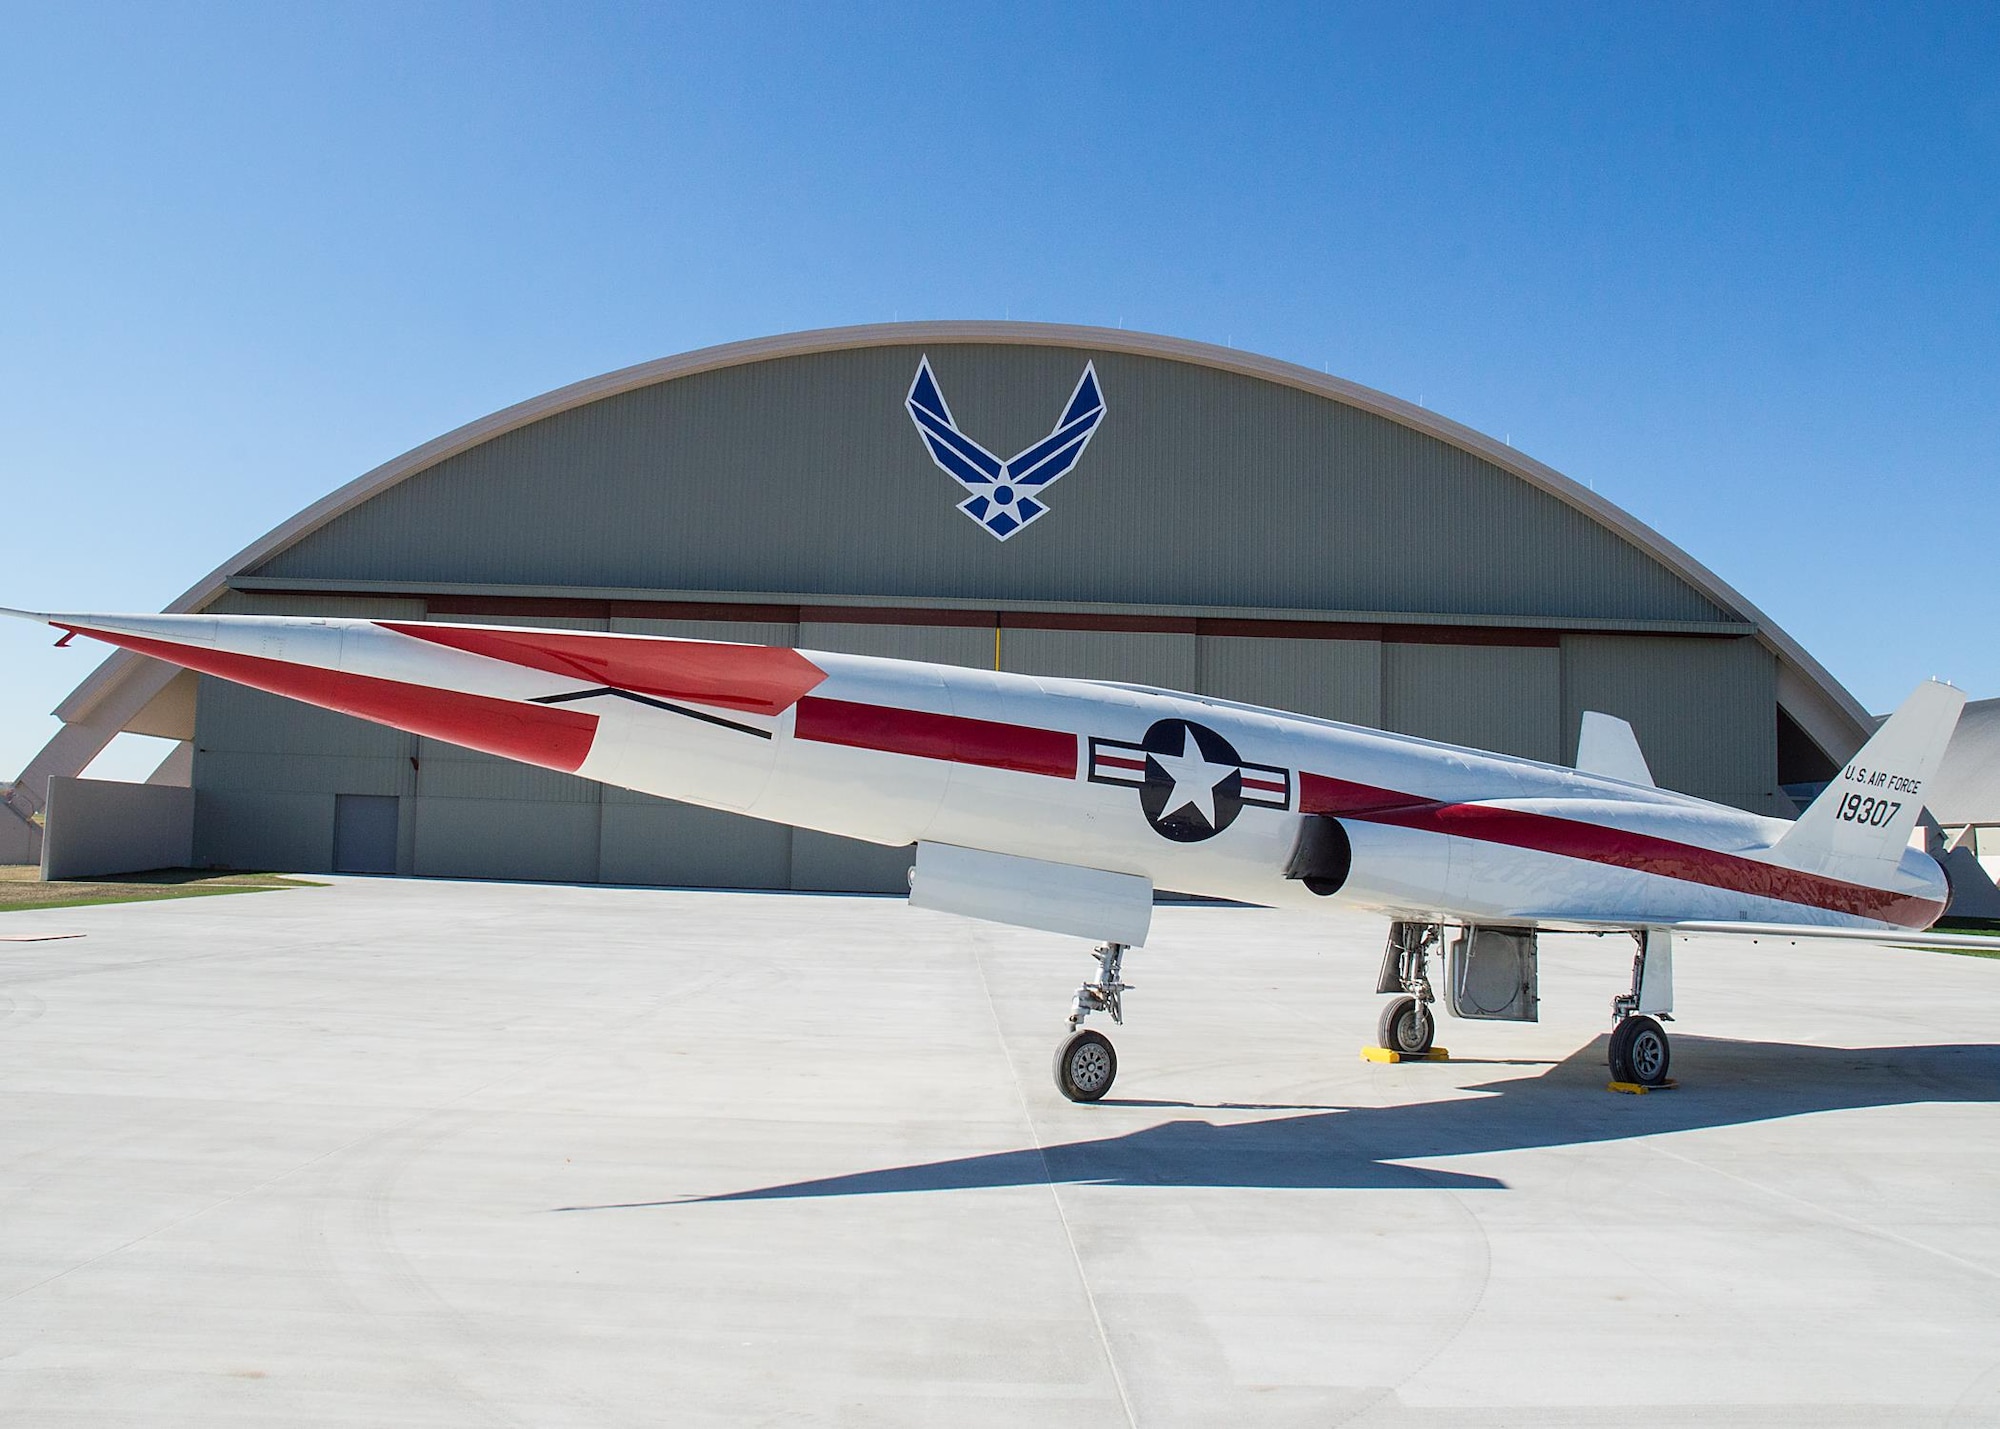 Restoration staff move the North American X-10 into the new fourth building at the National Museum of the U.S. Air Force on Oct. 14, 2015. (U.S. Air Force photo by Ken LaRock)